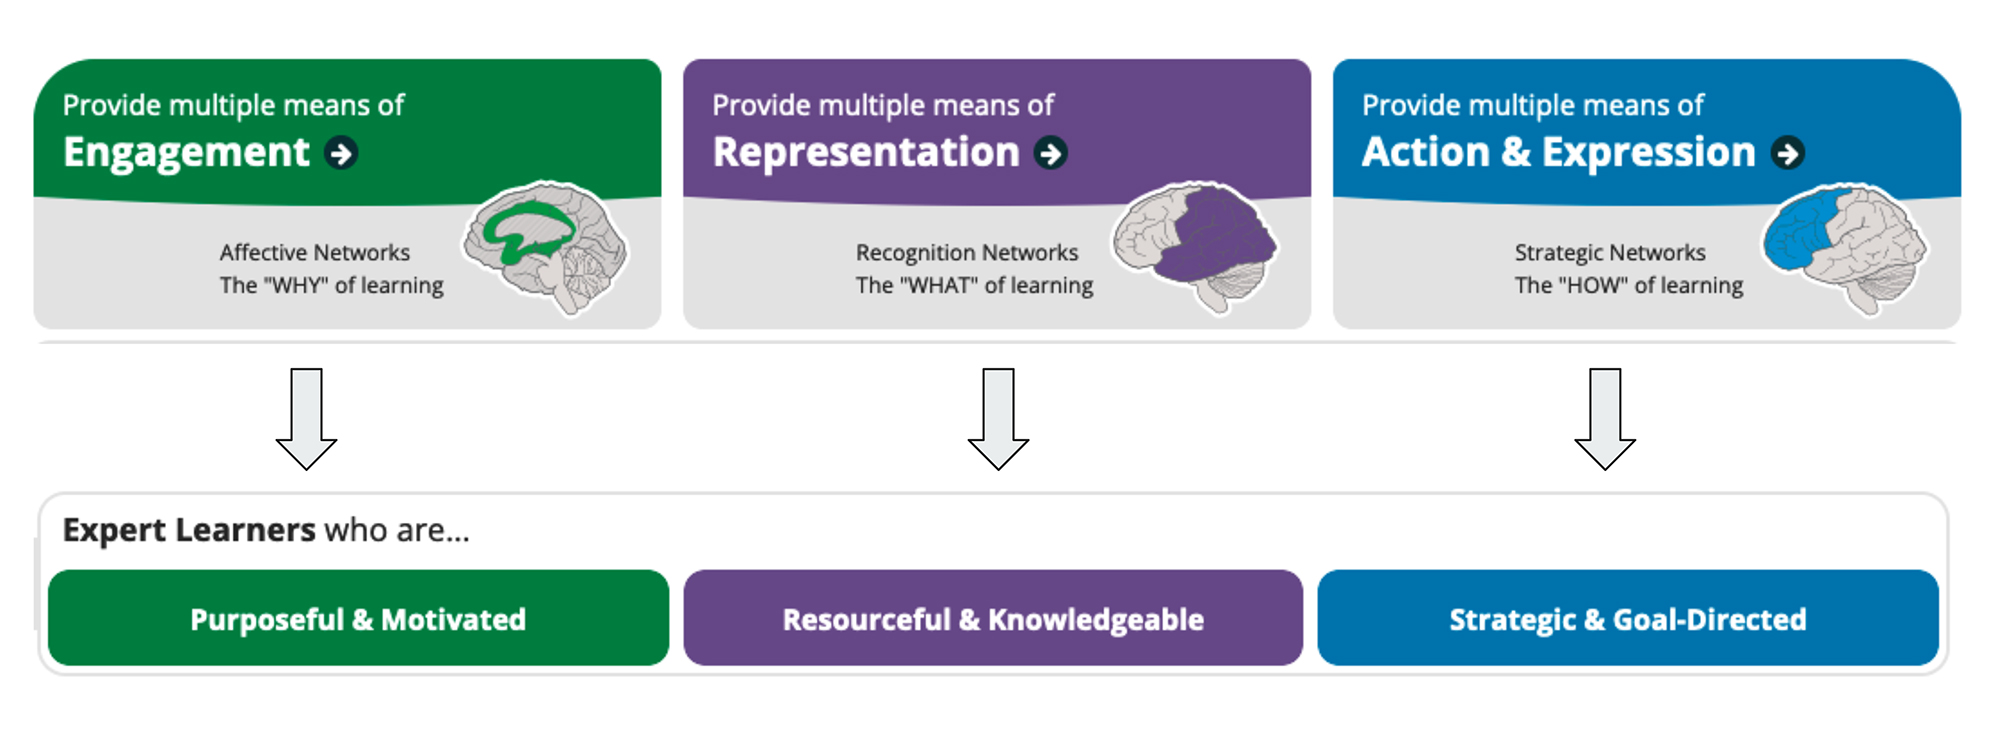 Three coloured boxes representing the three principles of UDL and what kind of learners they foster. Each principle is represented with a diagram of a brain, different parts of which are lit and engaged with each principle. The first box shows that providing multiple means of Engagement leads to Expert Learners who are Purposeful and Motivated. The second box shows that providing multiple means of Representation leads to Expert Learners who are Resourceful and Knowledgeable. The third box shows that providing multiple means of Action and Expression leads to Expert Learners who are Strategic and Goal-Oriented.